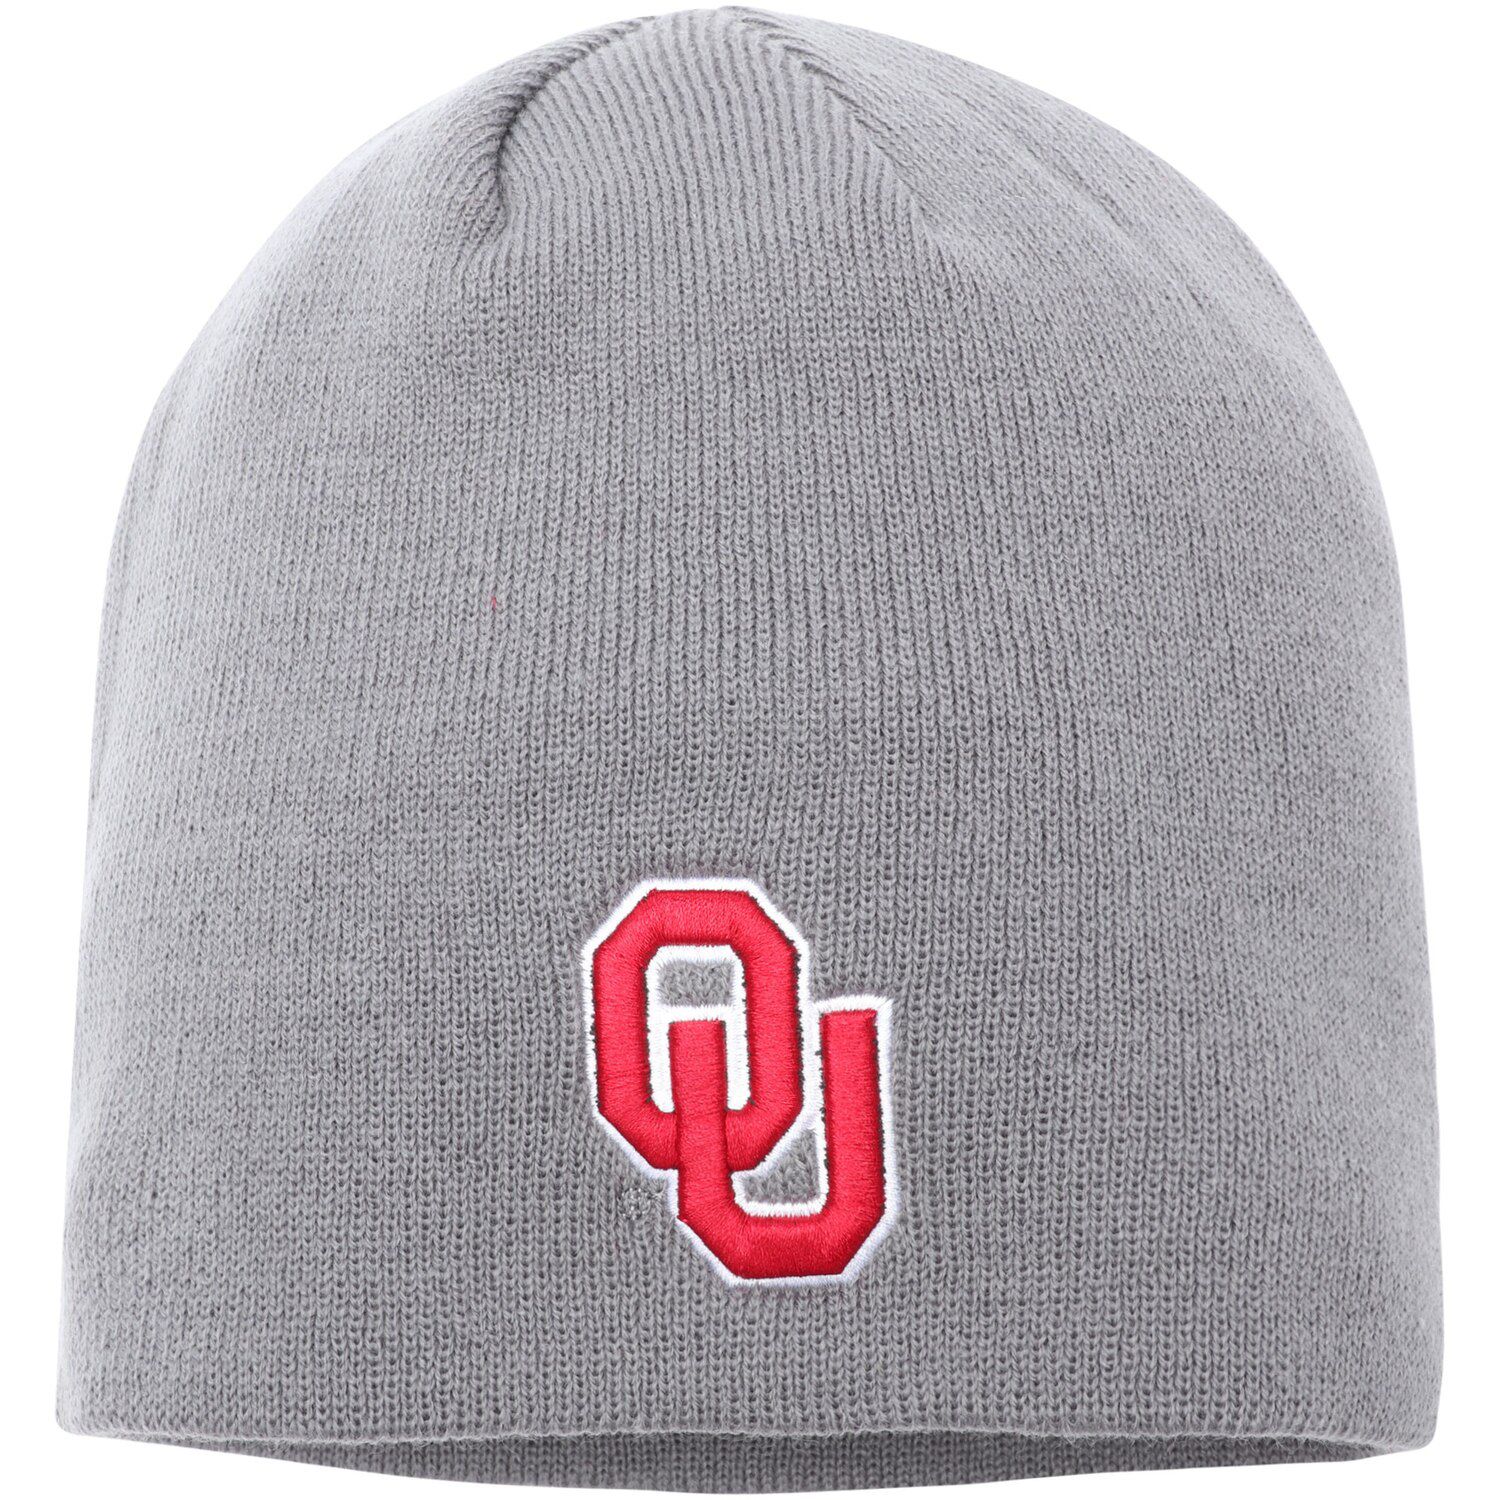 Image for Unbranded Men's Top of the World Gray Oklahoma Sooners EZDOZIT Knit Beanie at Kohl's.